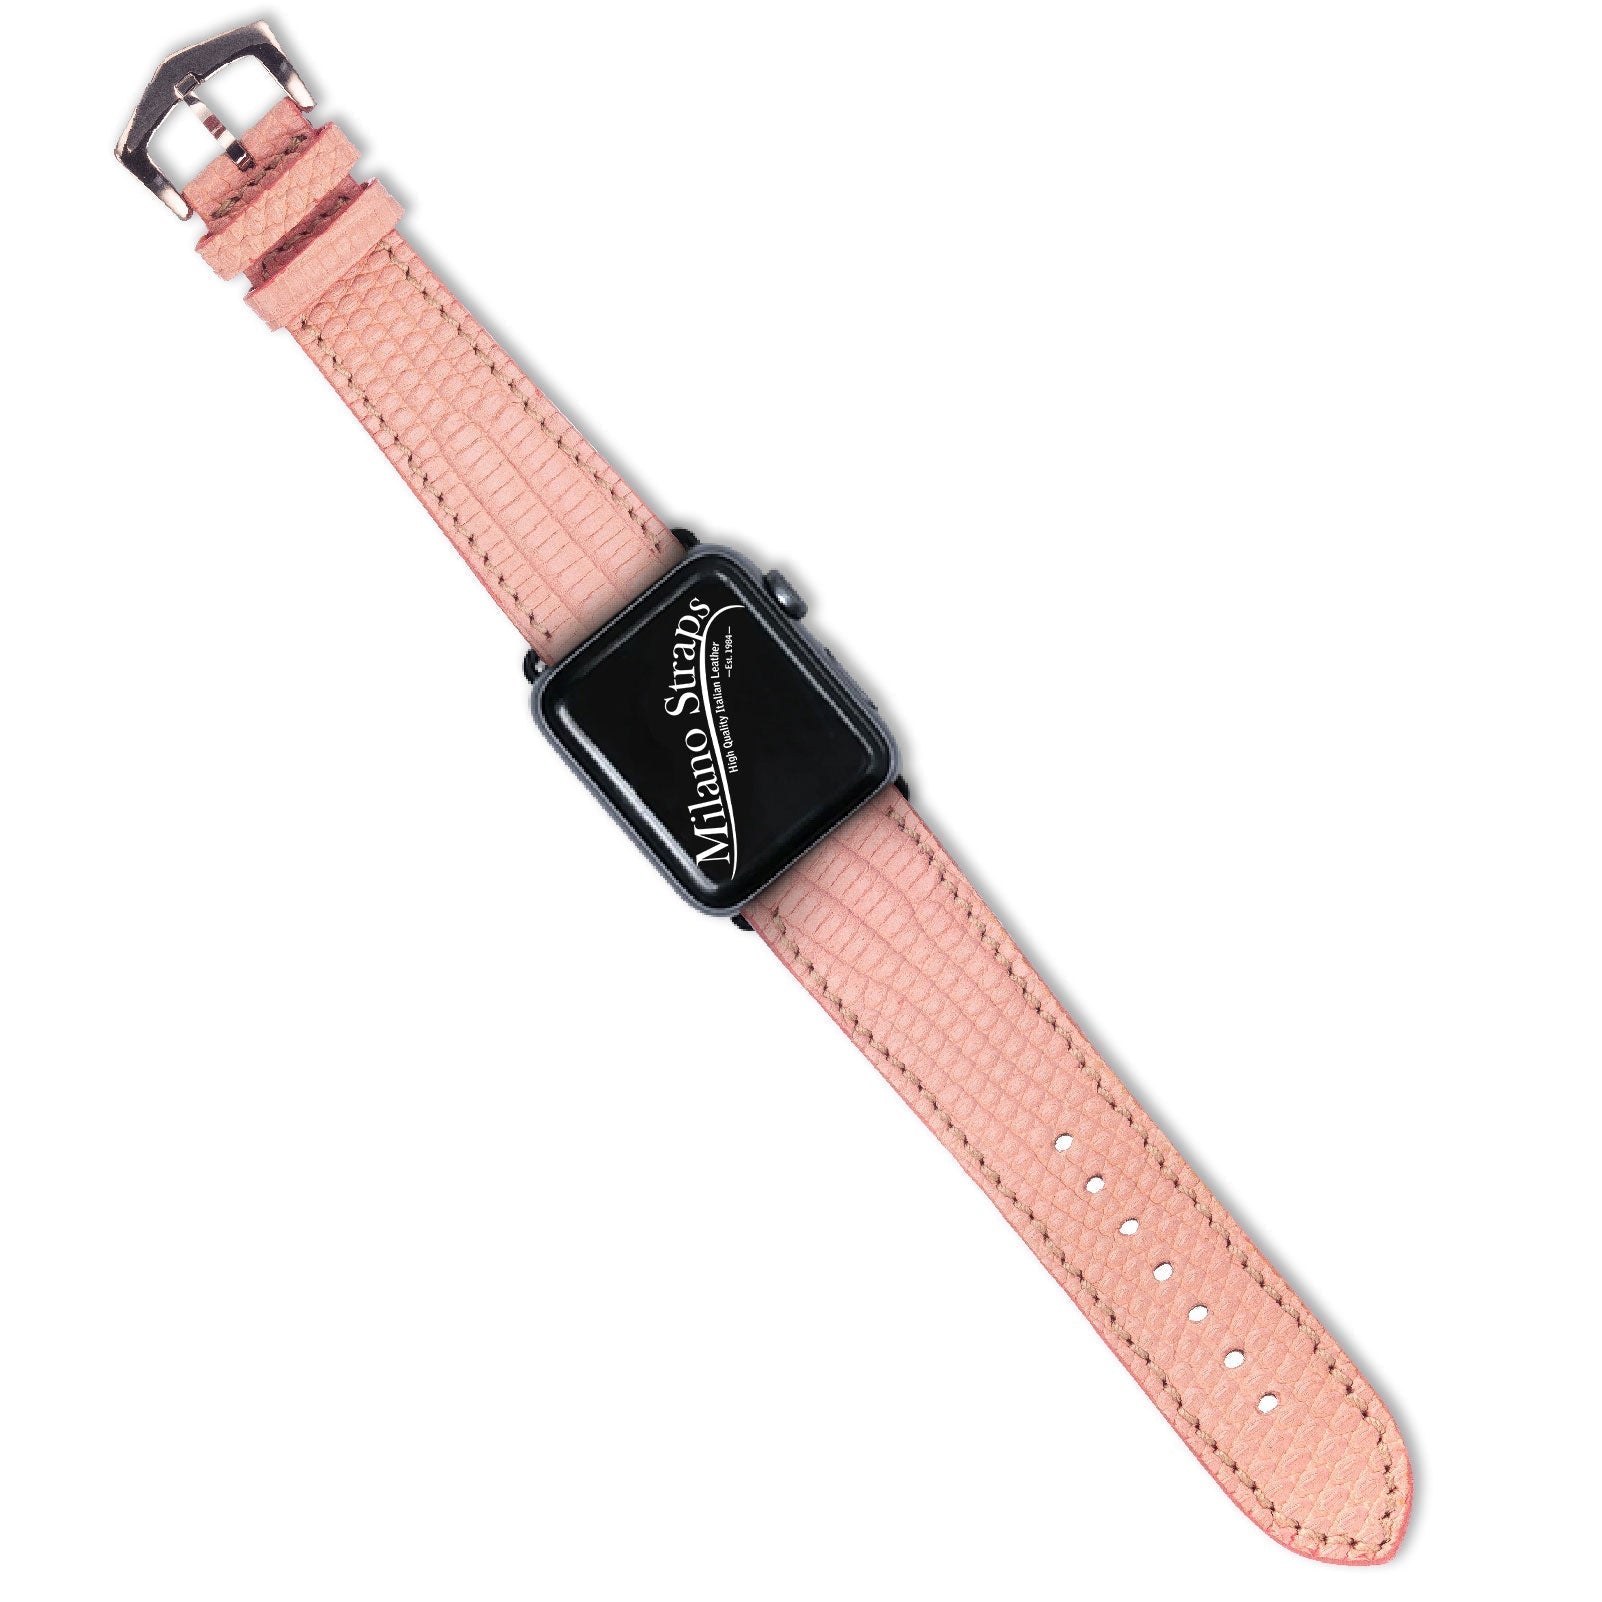 22MM Width Minimalist Watchband Compatible With Apple Watch